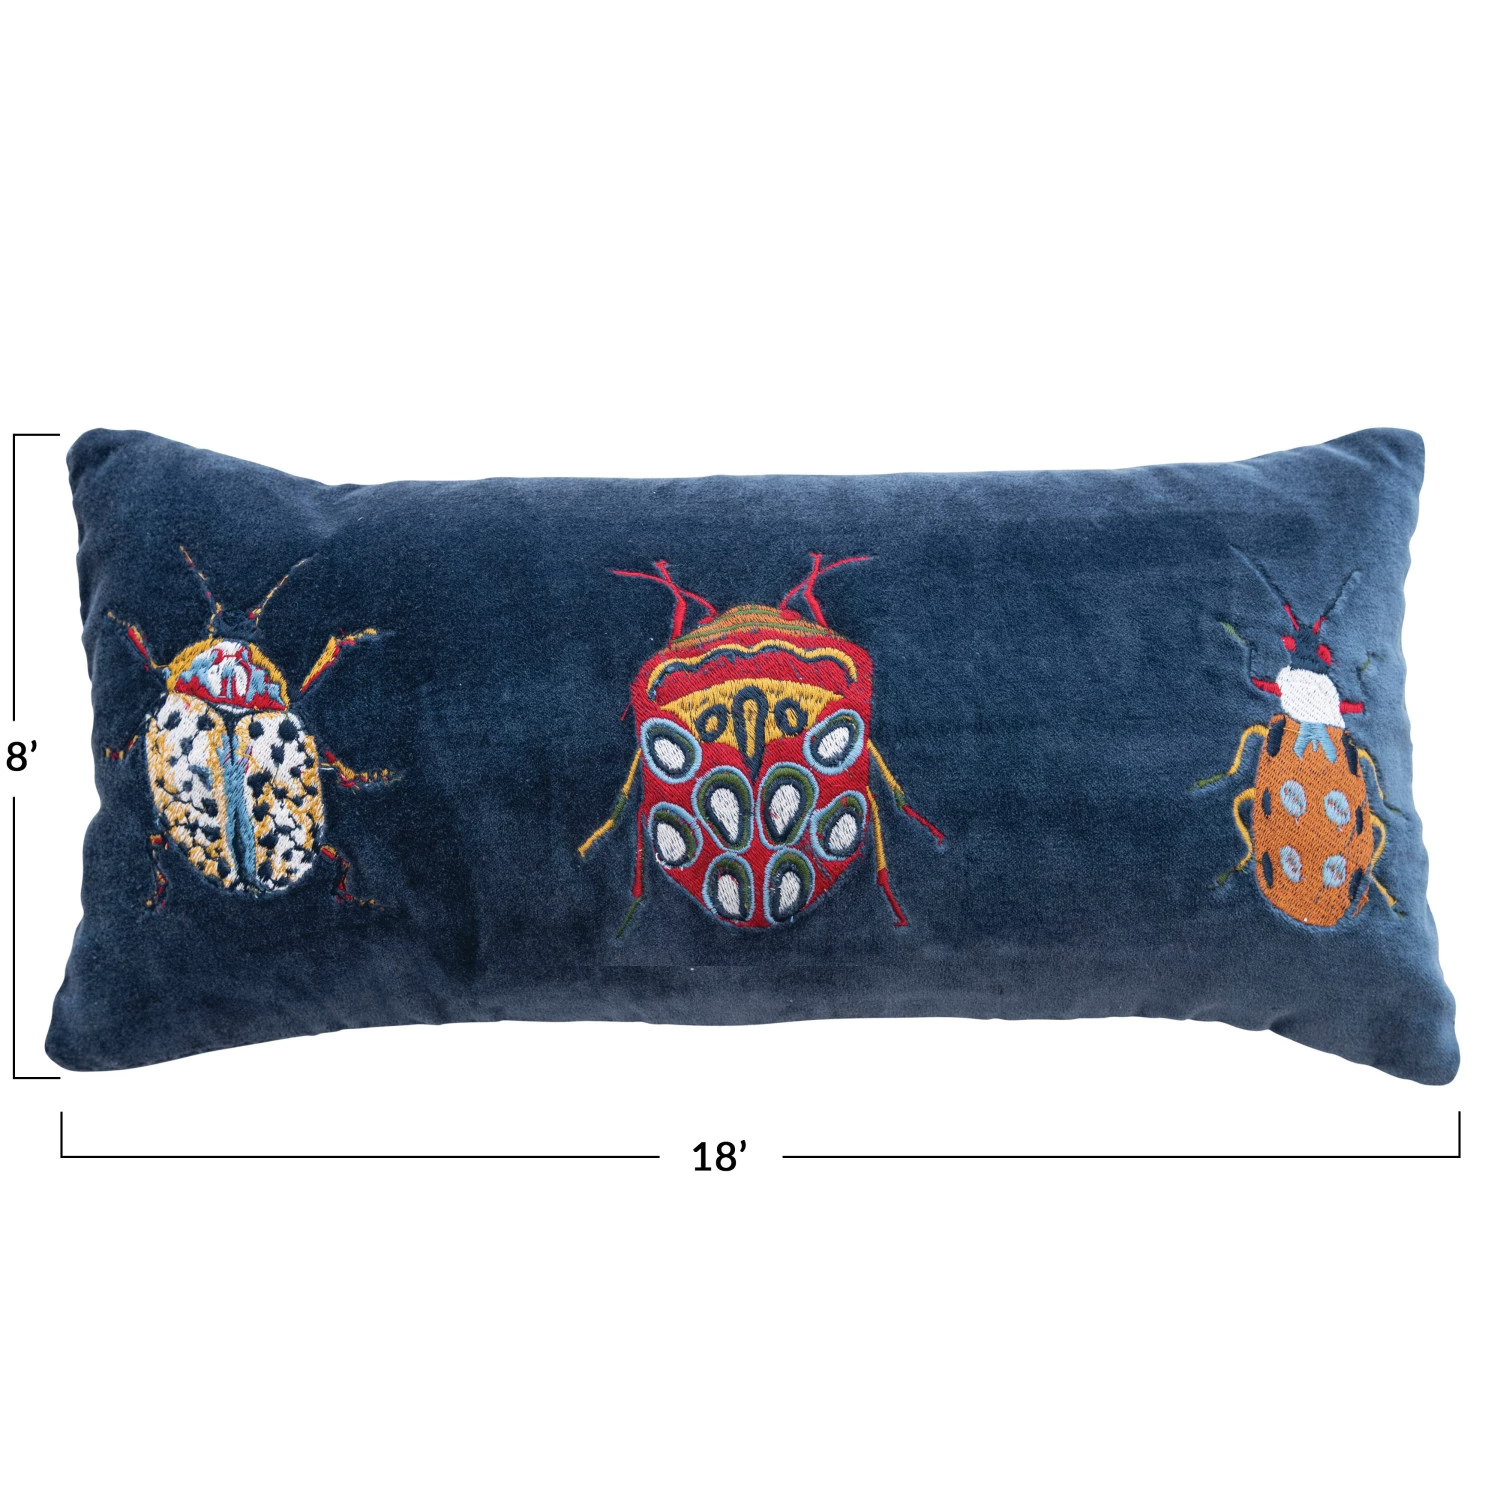 Embroidered Beetles Velvet and Cotton Lumbar Pillow- 18-in x 8-in - Mellow Monkey